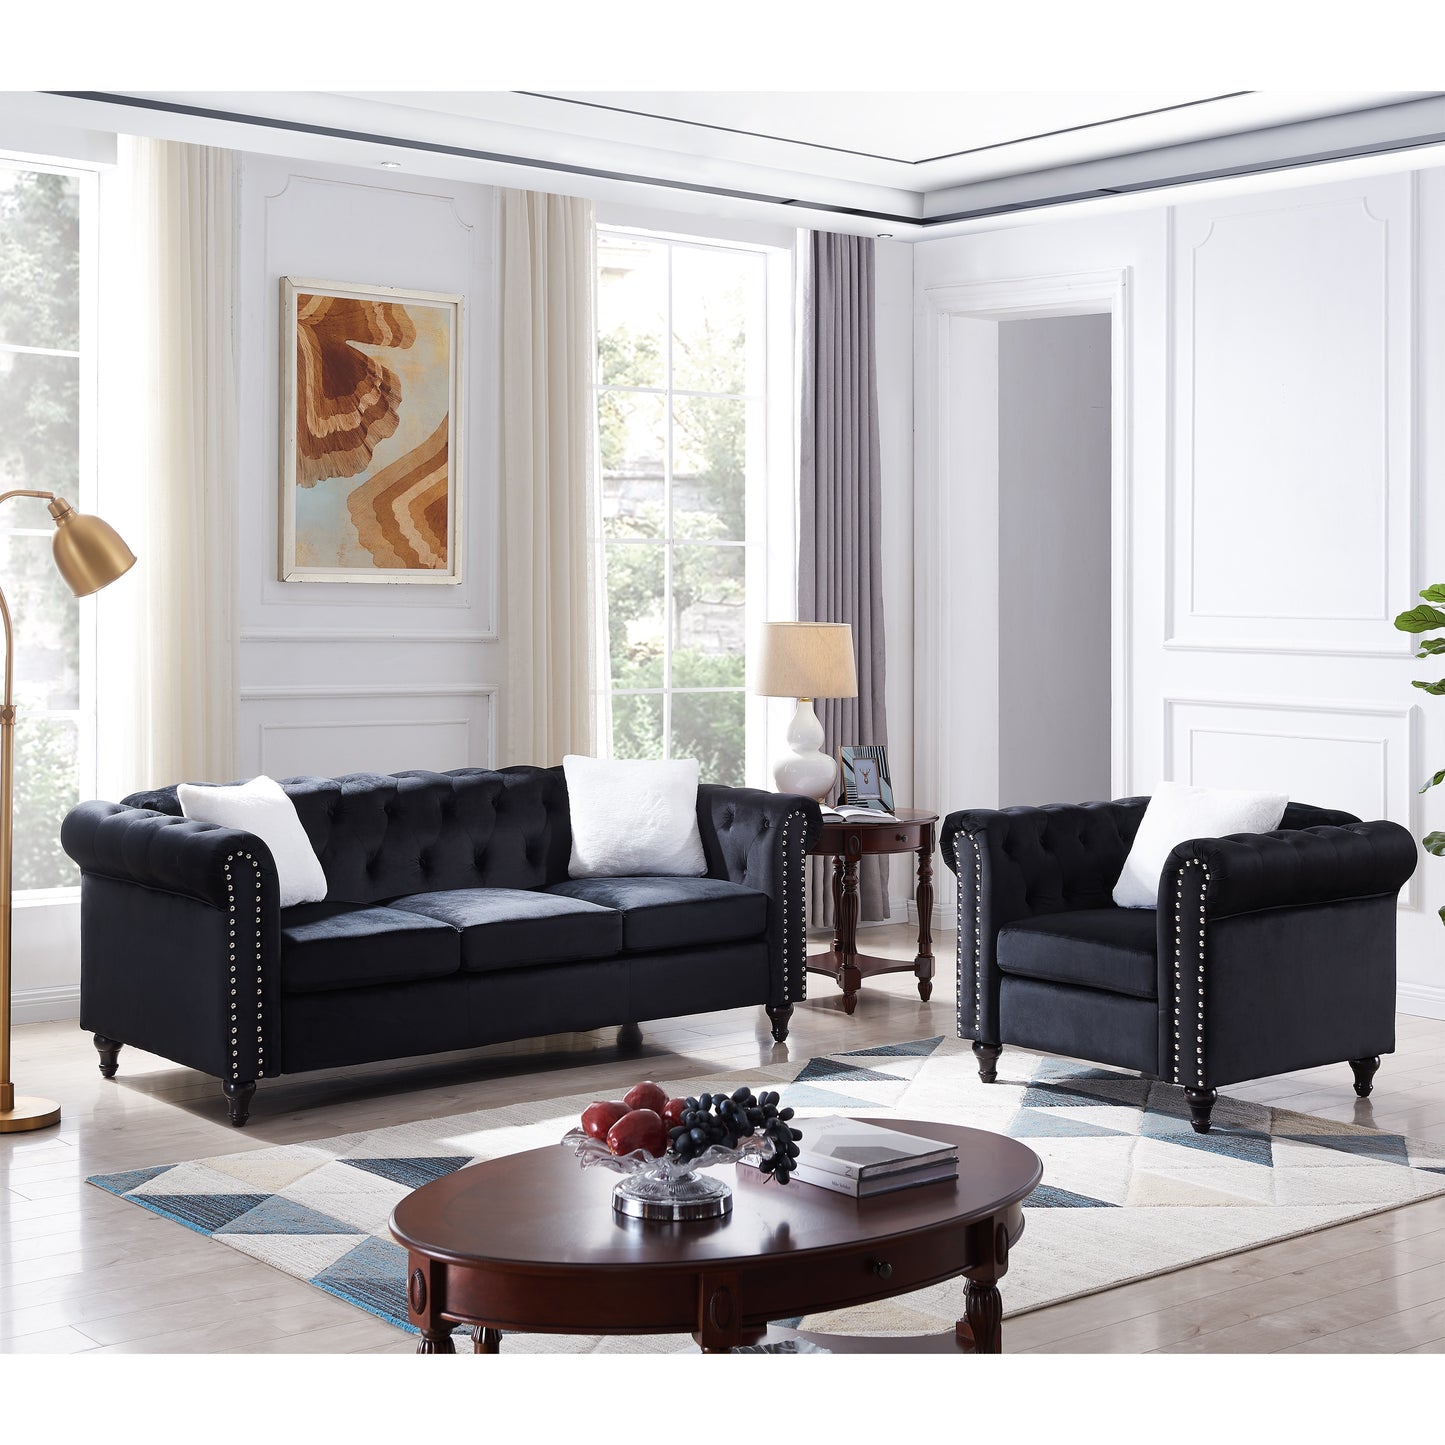 2 Piece Living Room Sofa Set, including 3-Seater Sofa and Loveseat, with Button and Copper Nail on Arms and Back